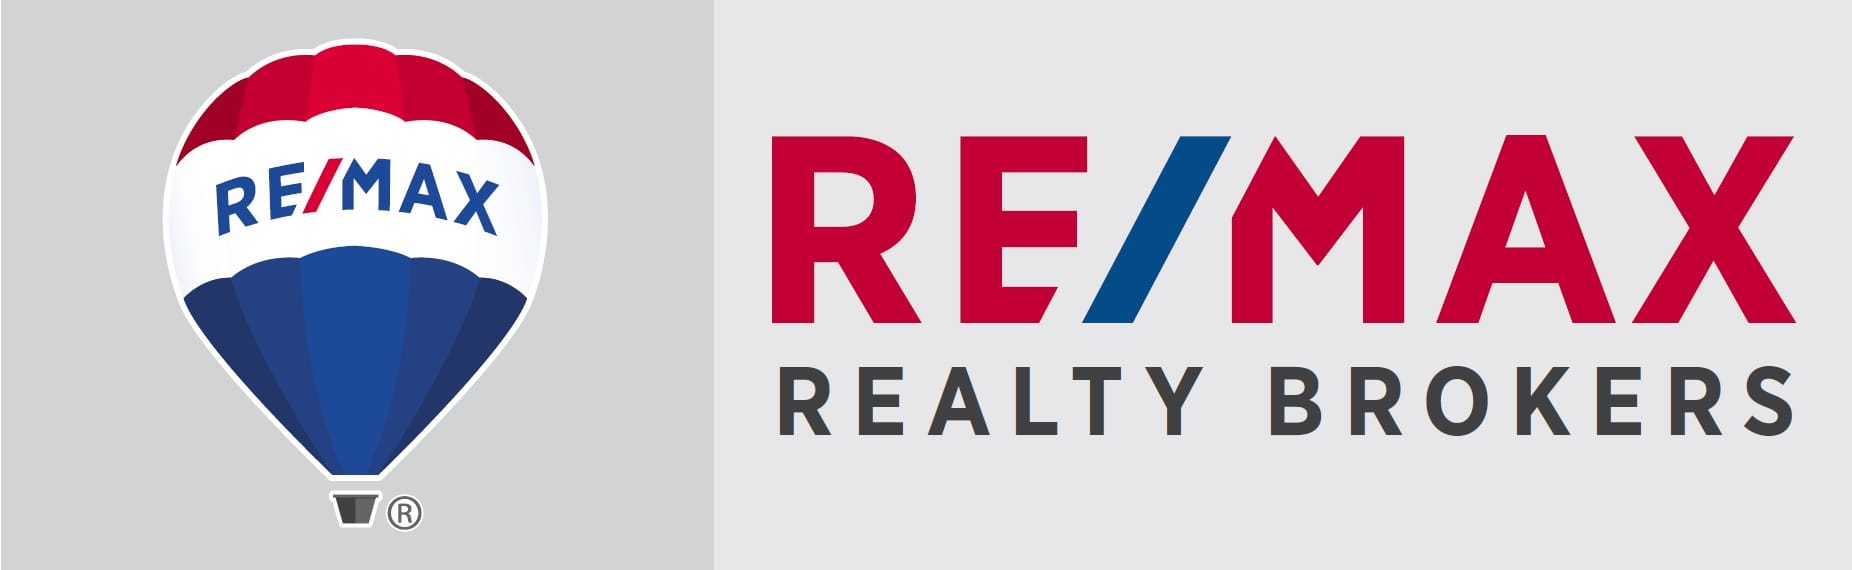 RE/MAX Realty Brokers